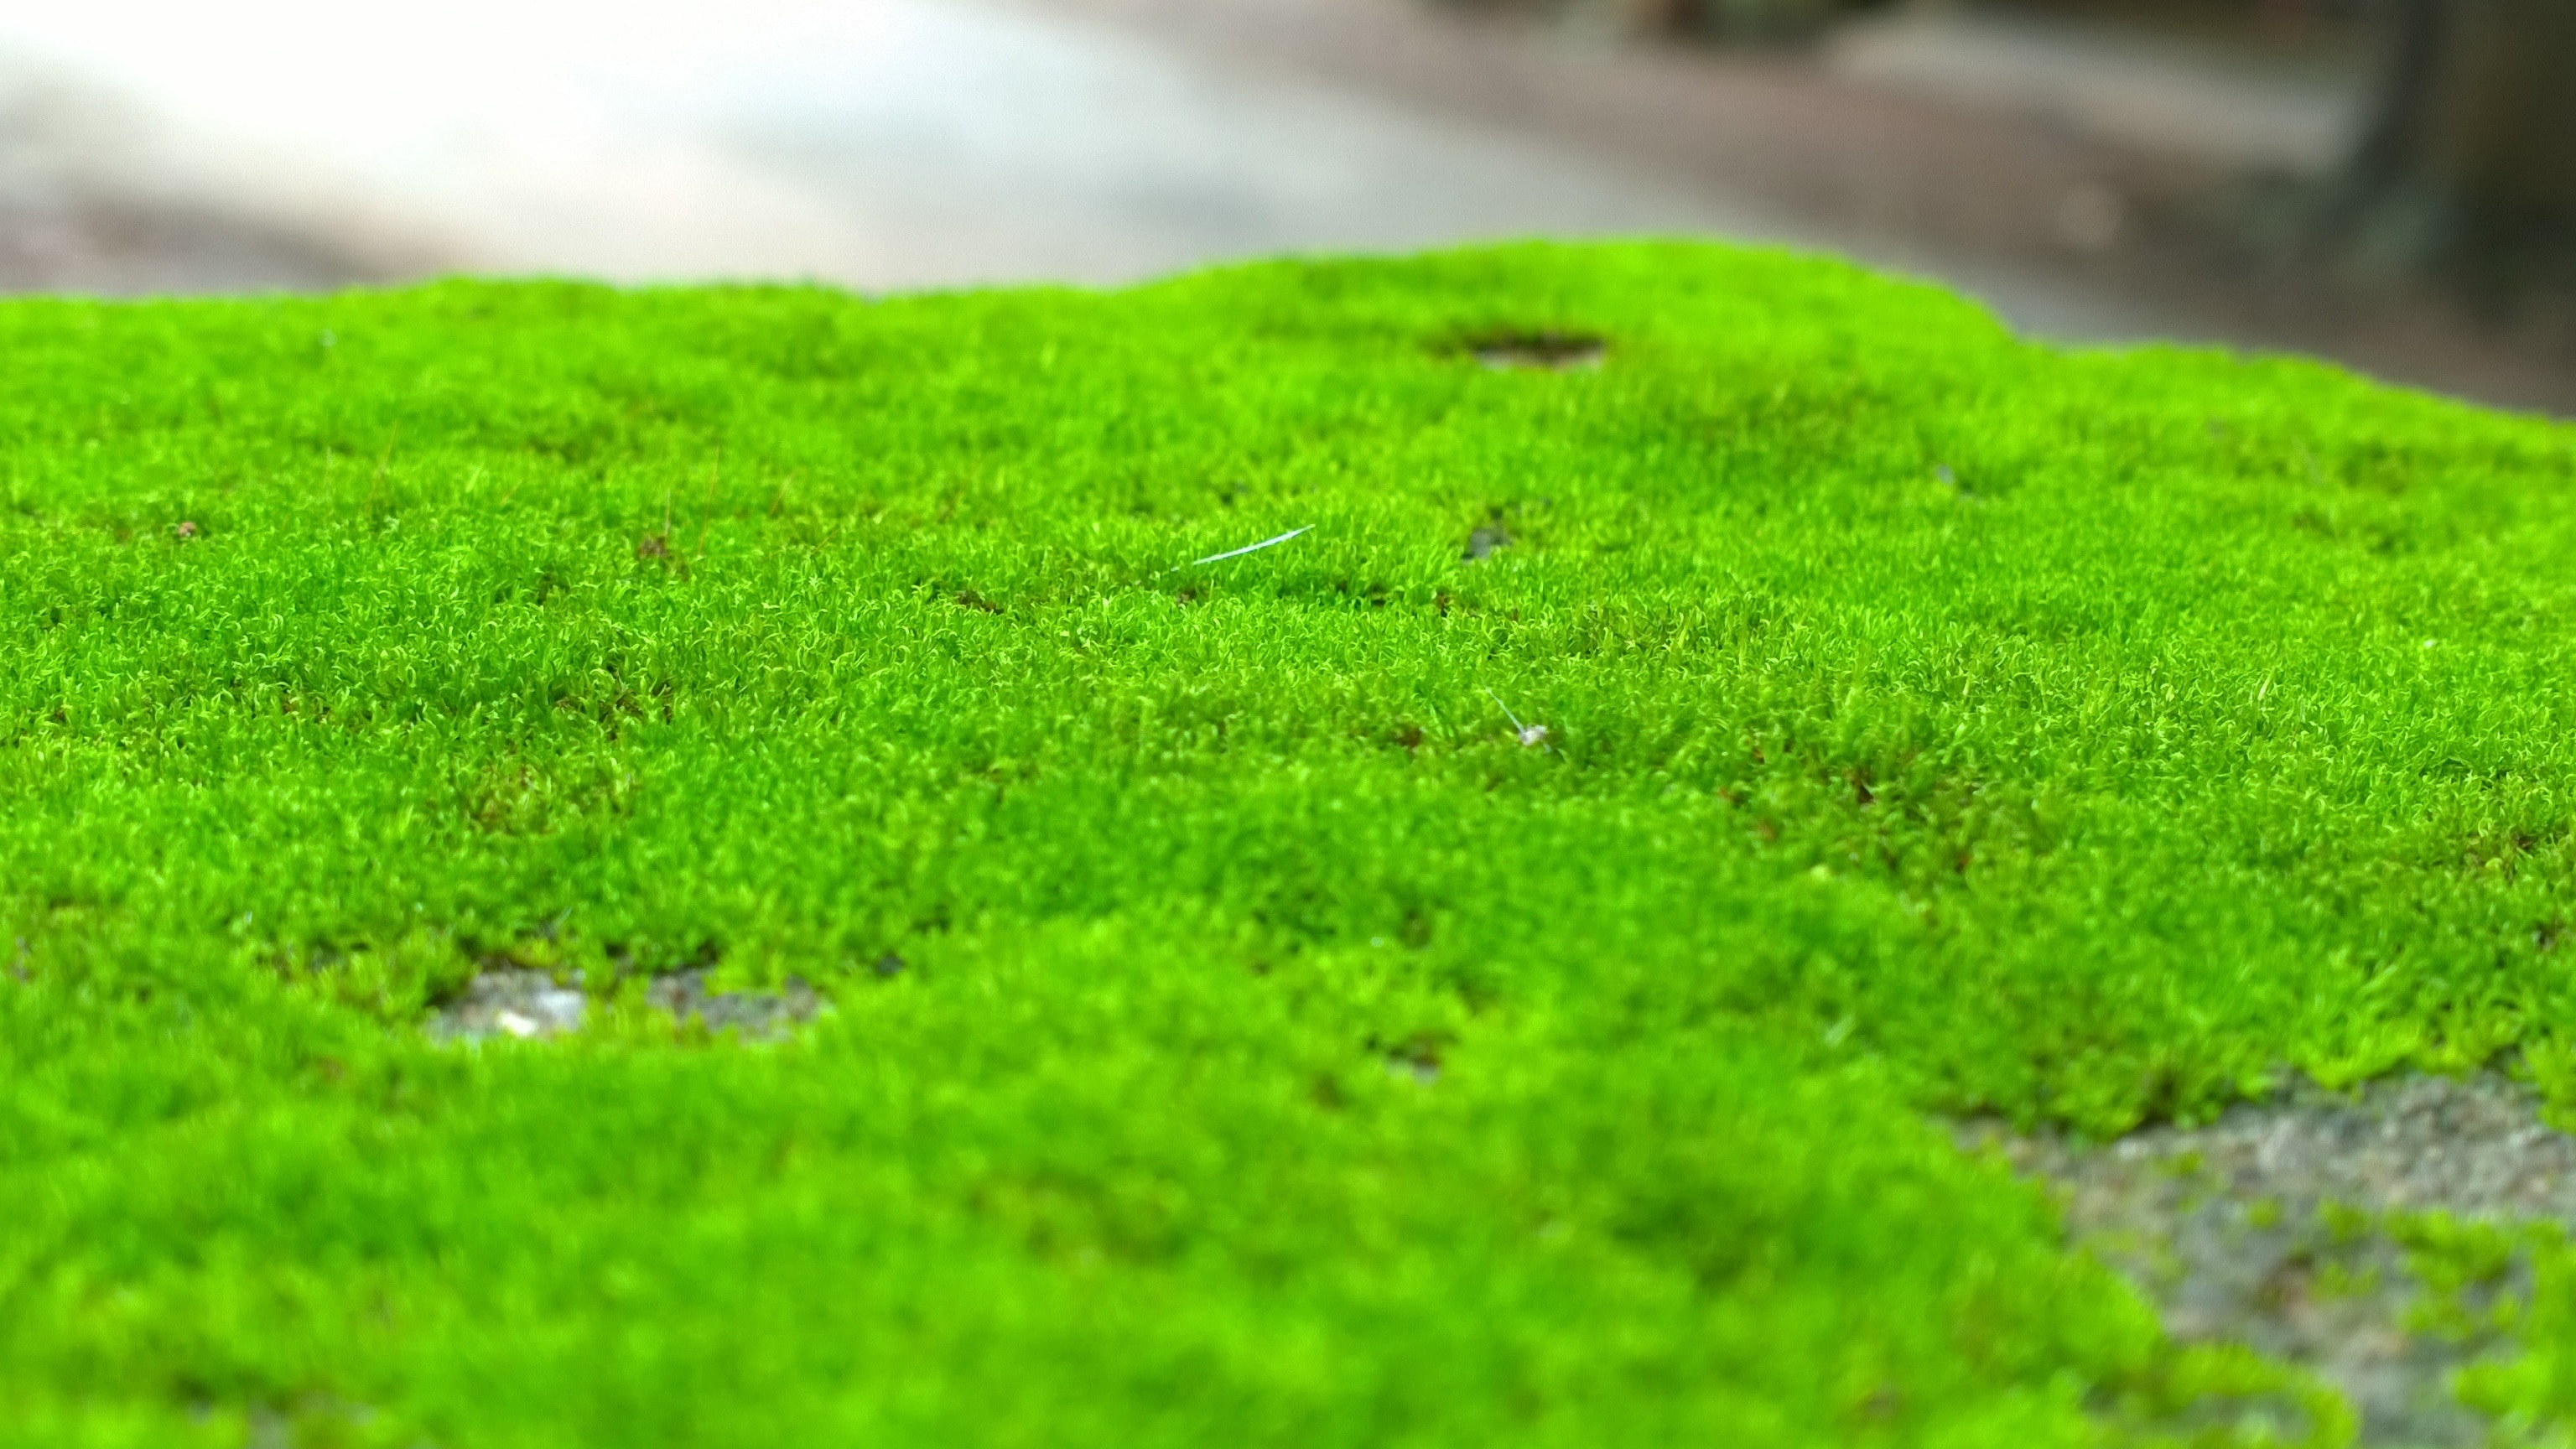 Natural, Moss, Greenery, Outdoor, green color, grass